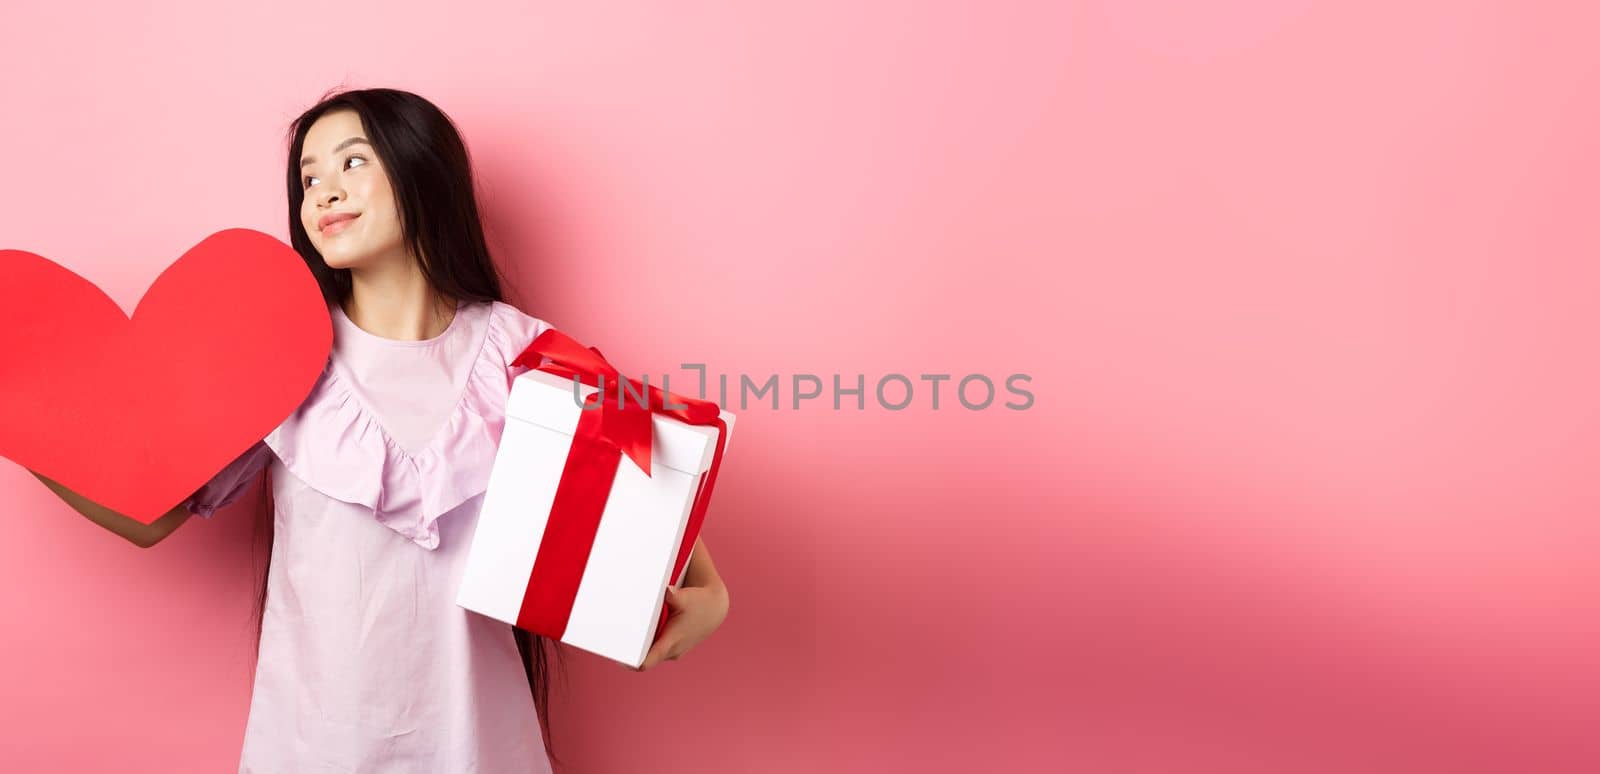 Valentines day concept. Romantic girl holding lover gifts, big red heart card and box with present, looking aside with dreamy look, falling in love, smiling tenderly, pink background.